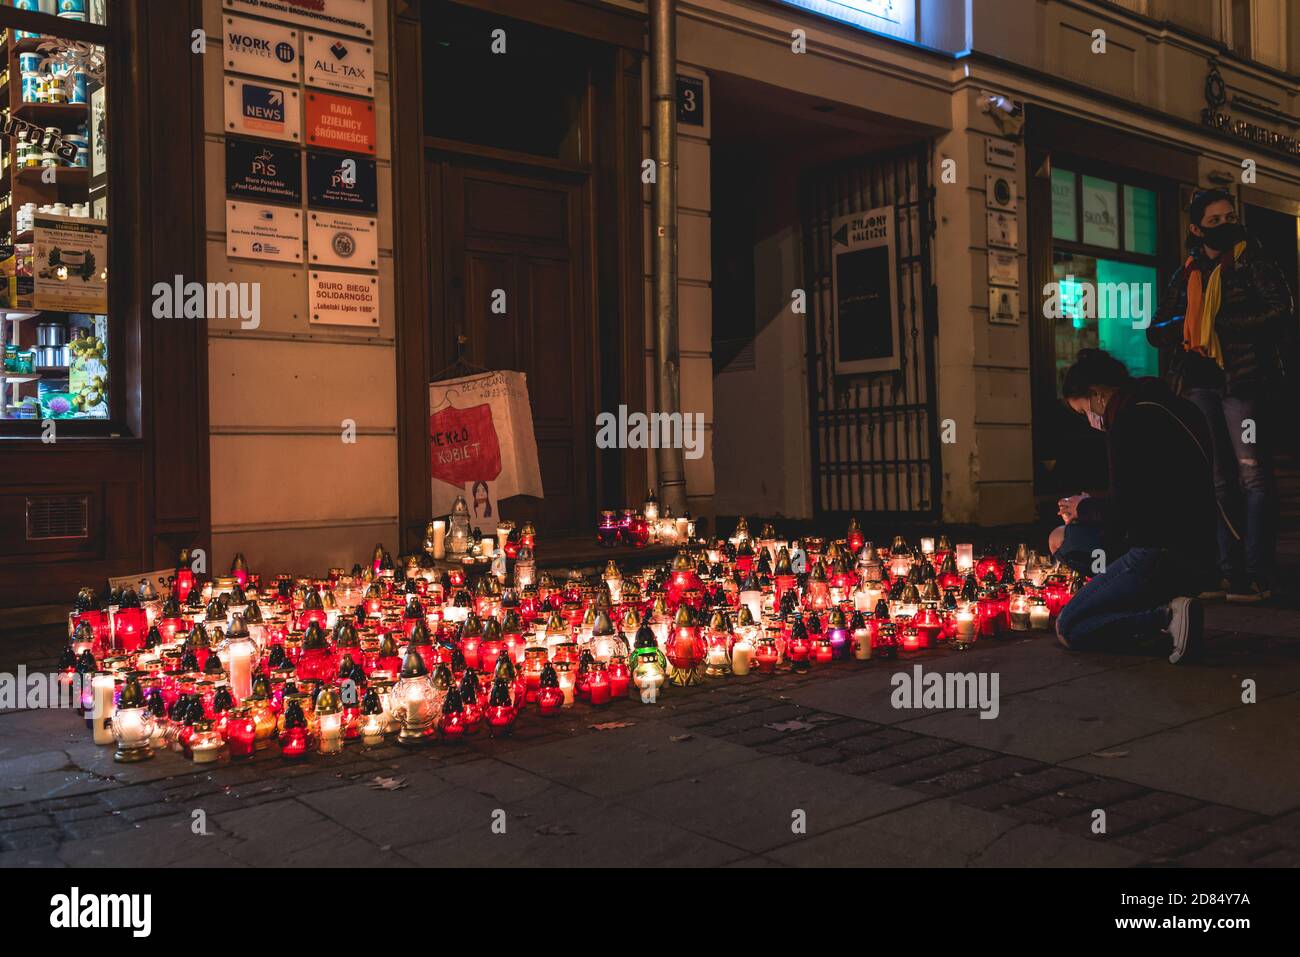 Lublin, Poland - October 23, 2020: Women putting down grave candle during protest by Strajk Kobiet against abortion ban in Poland Stock Photo